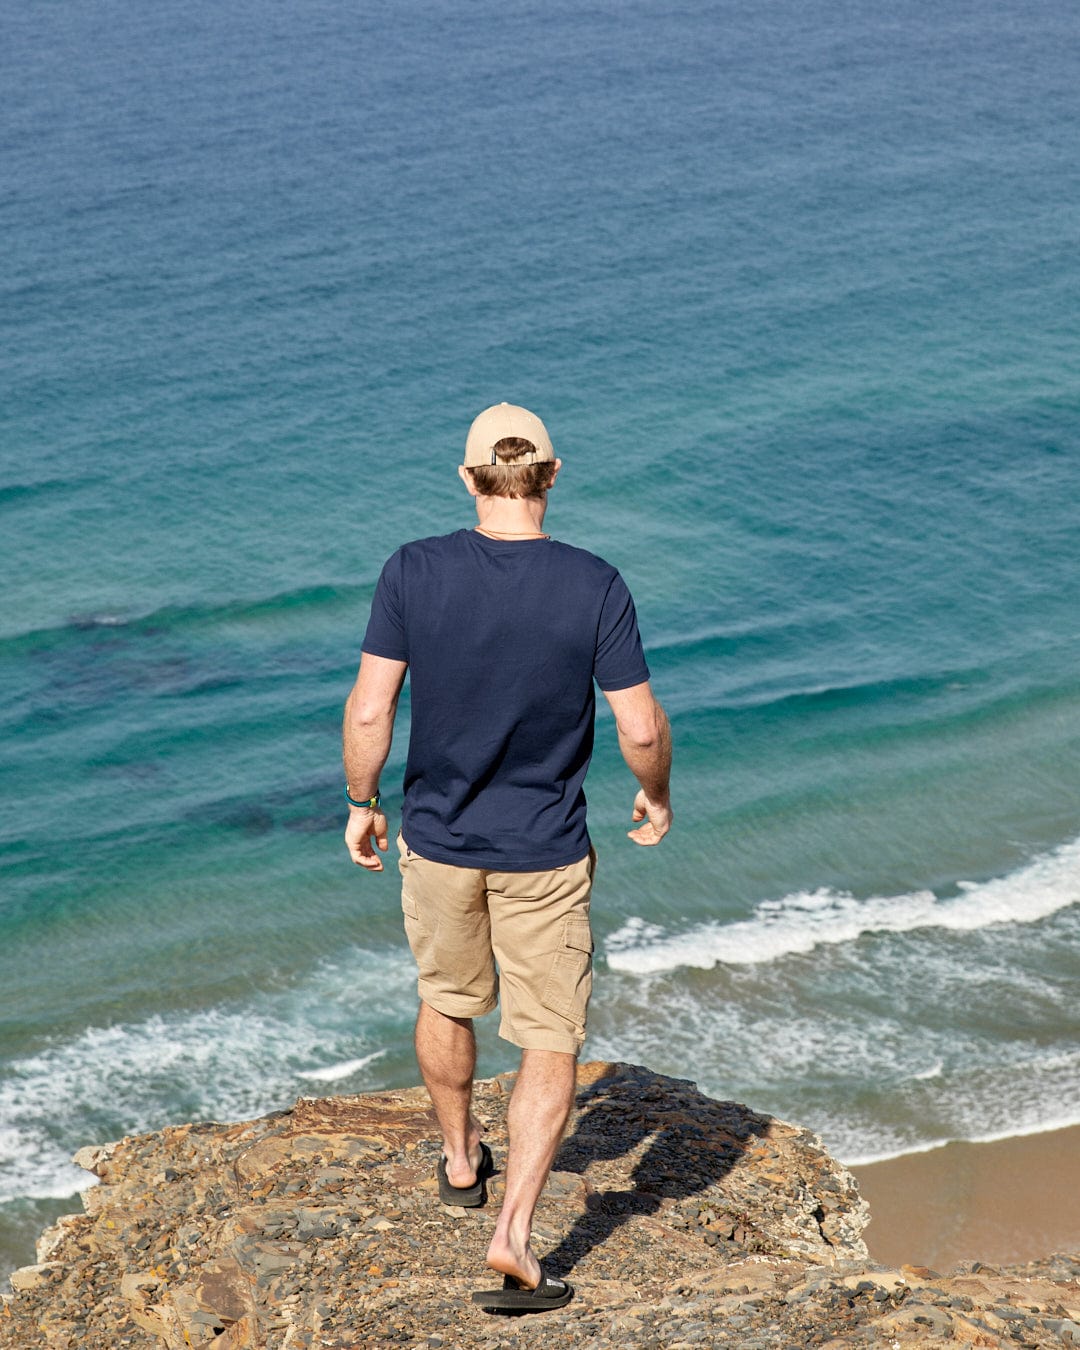 A man, wearing Layers Devon - Mens Short Sleeve T-Shirt in Blue from Saltrock, is standing on a cliff overlooking the ocean.